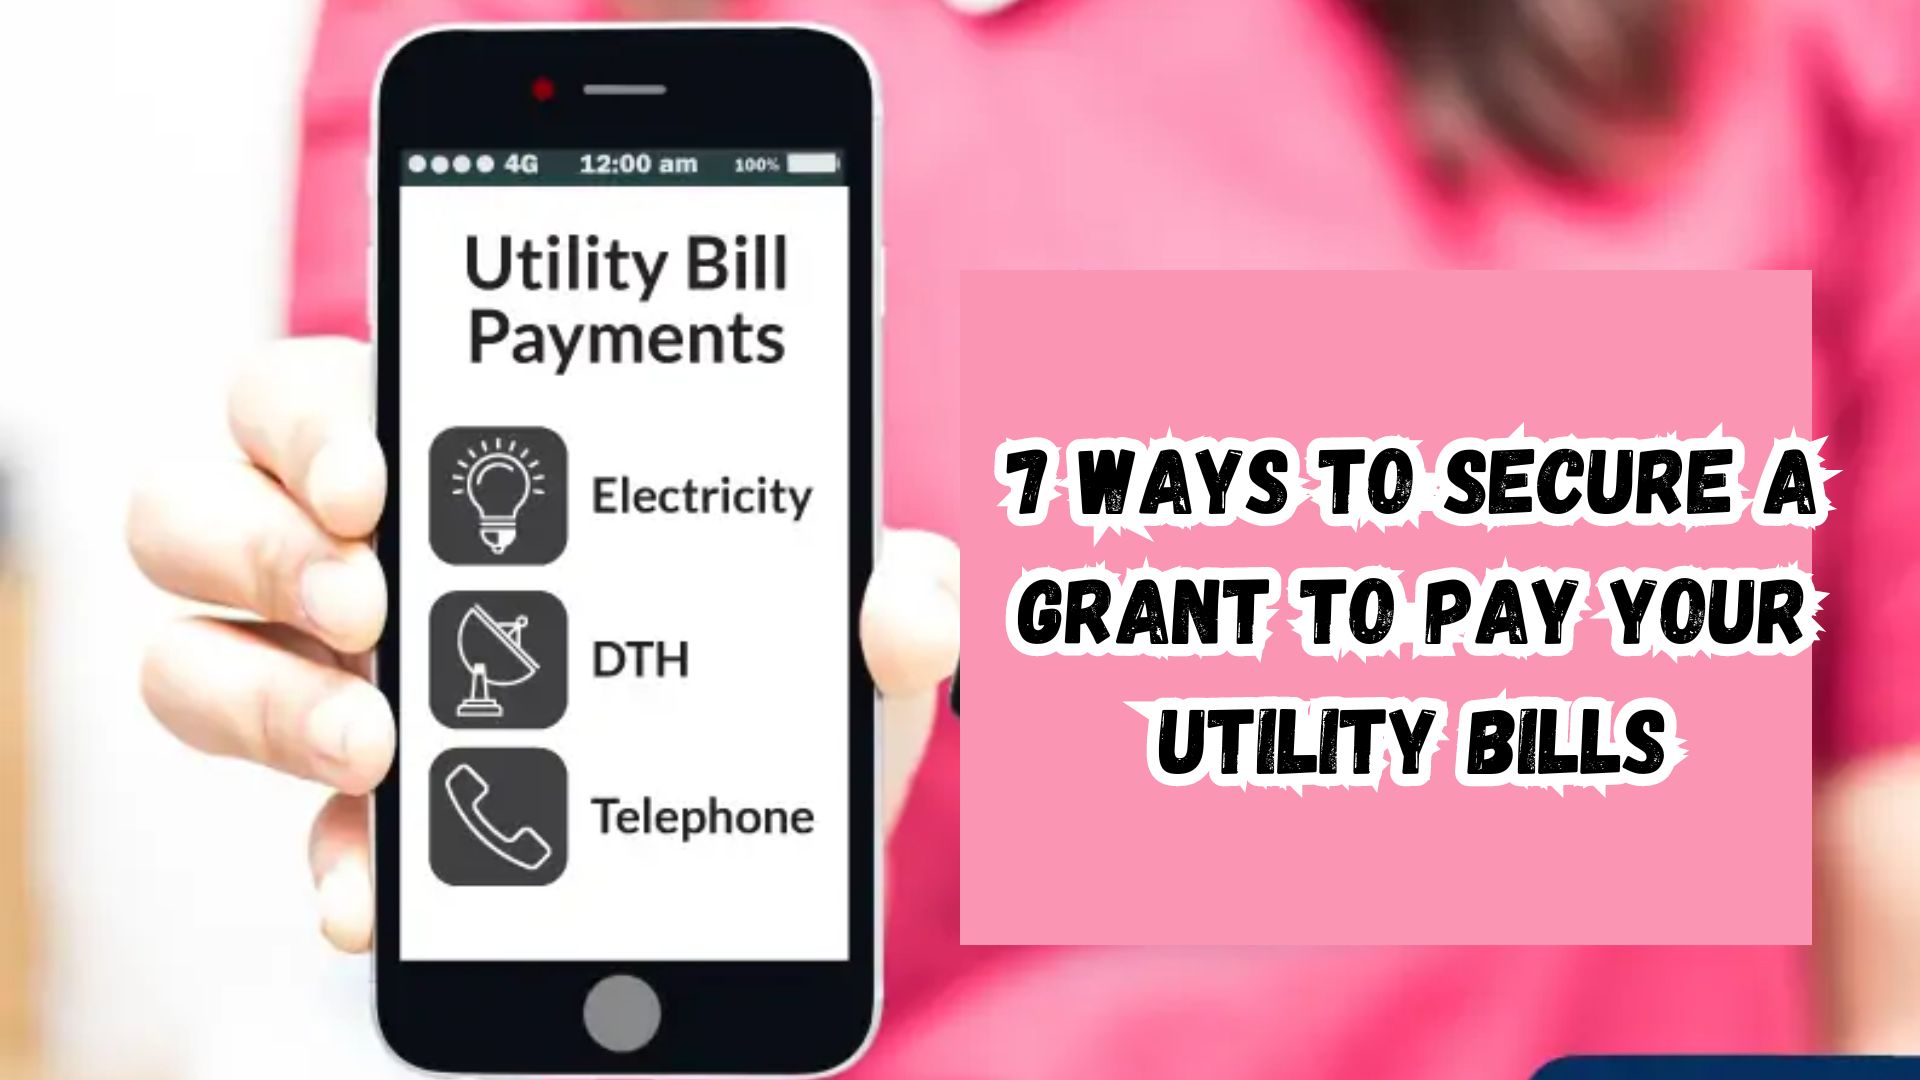 7 Ways to Secure a Grant to Pay Your Utility Bills.